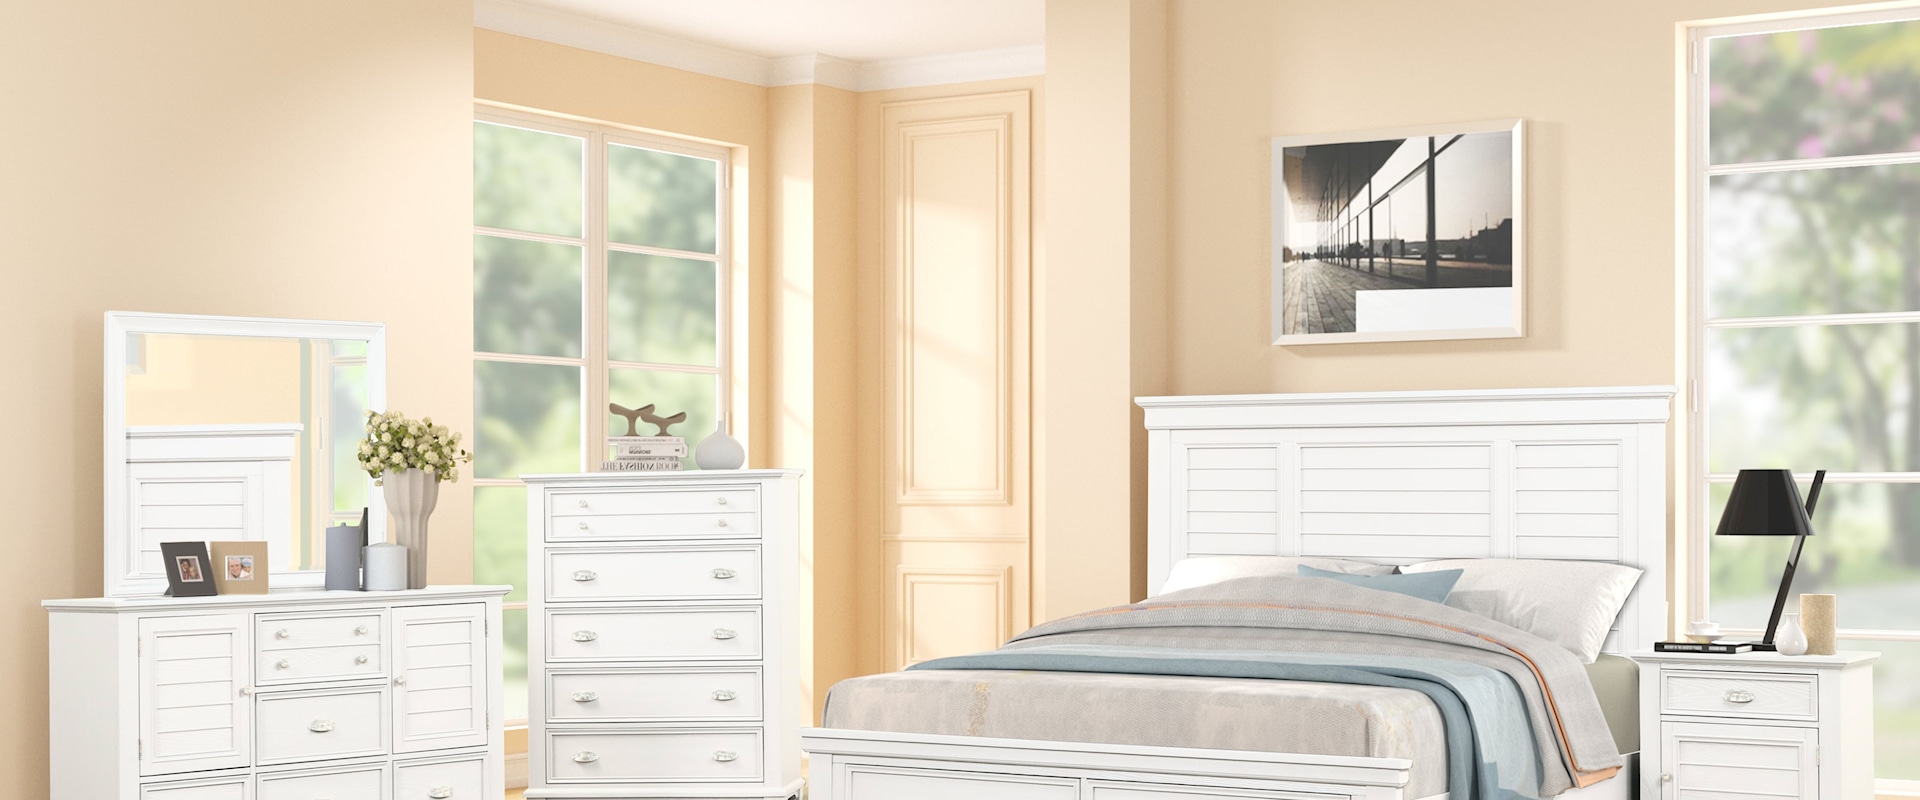 Transitional 5-Piece Queen Bedroom Set with Footboard Storage